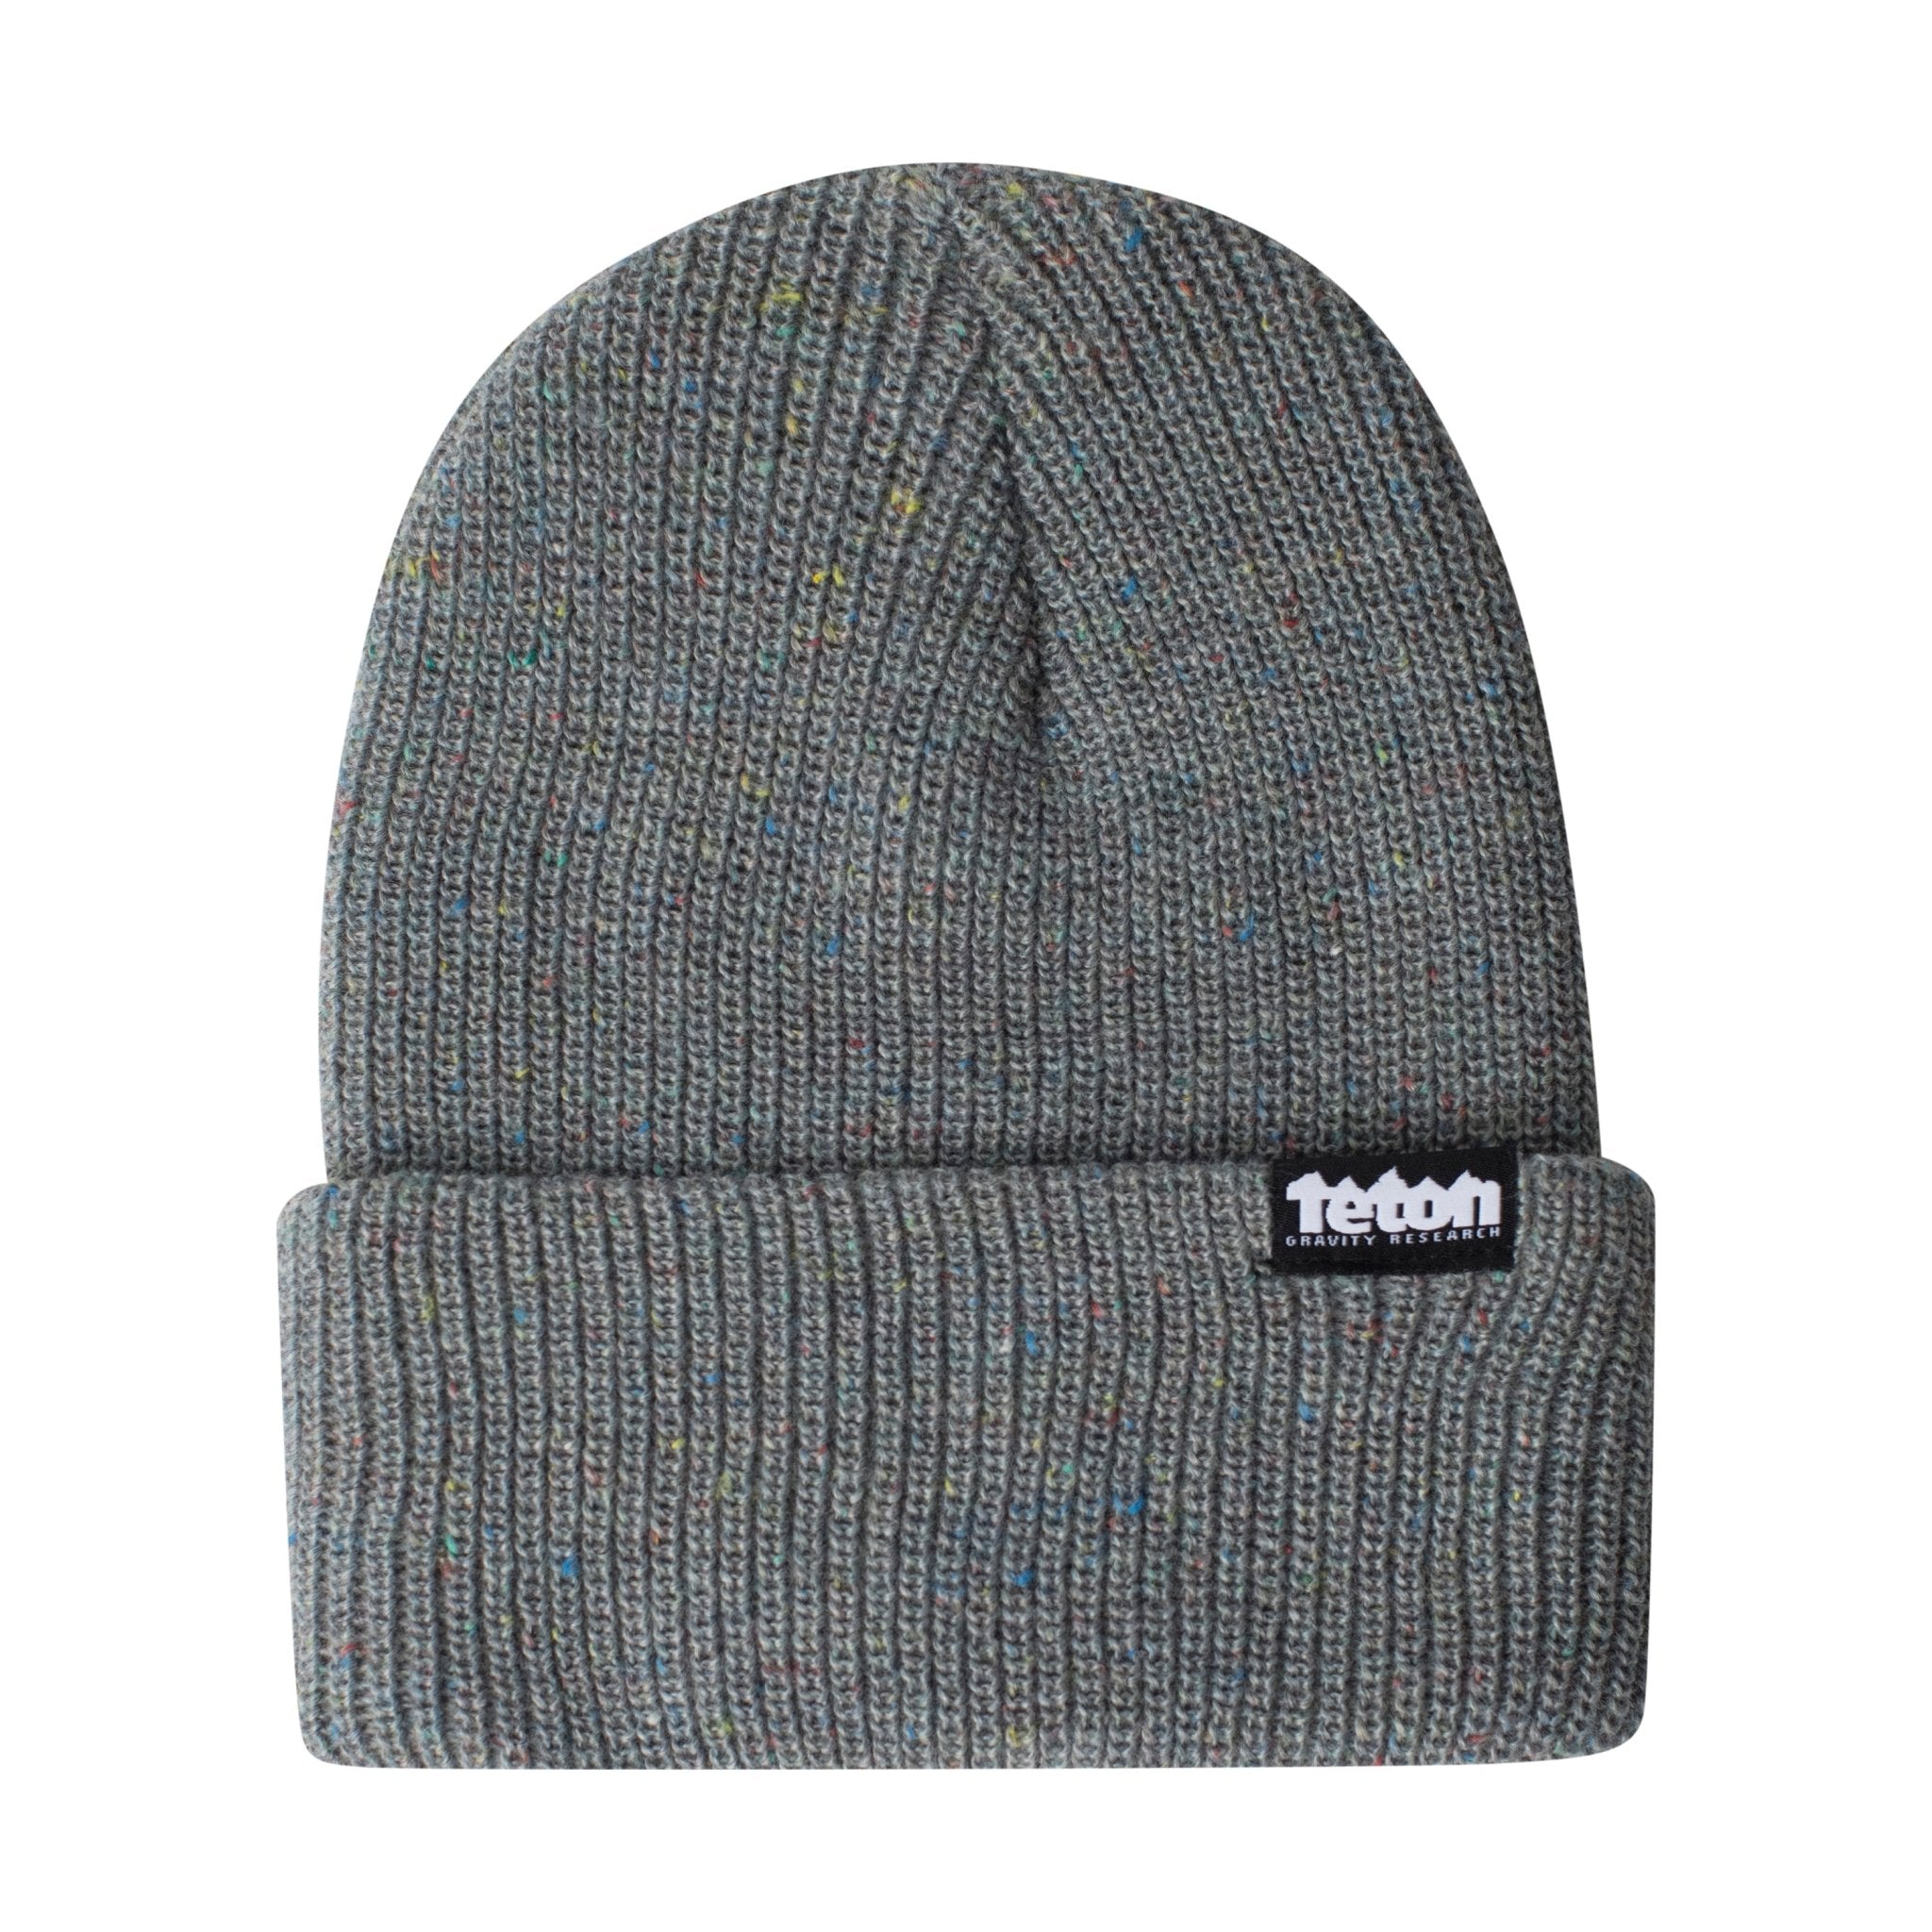 Speckled Watch Beanie - Teton Gravity Research #color_grey